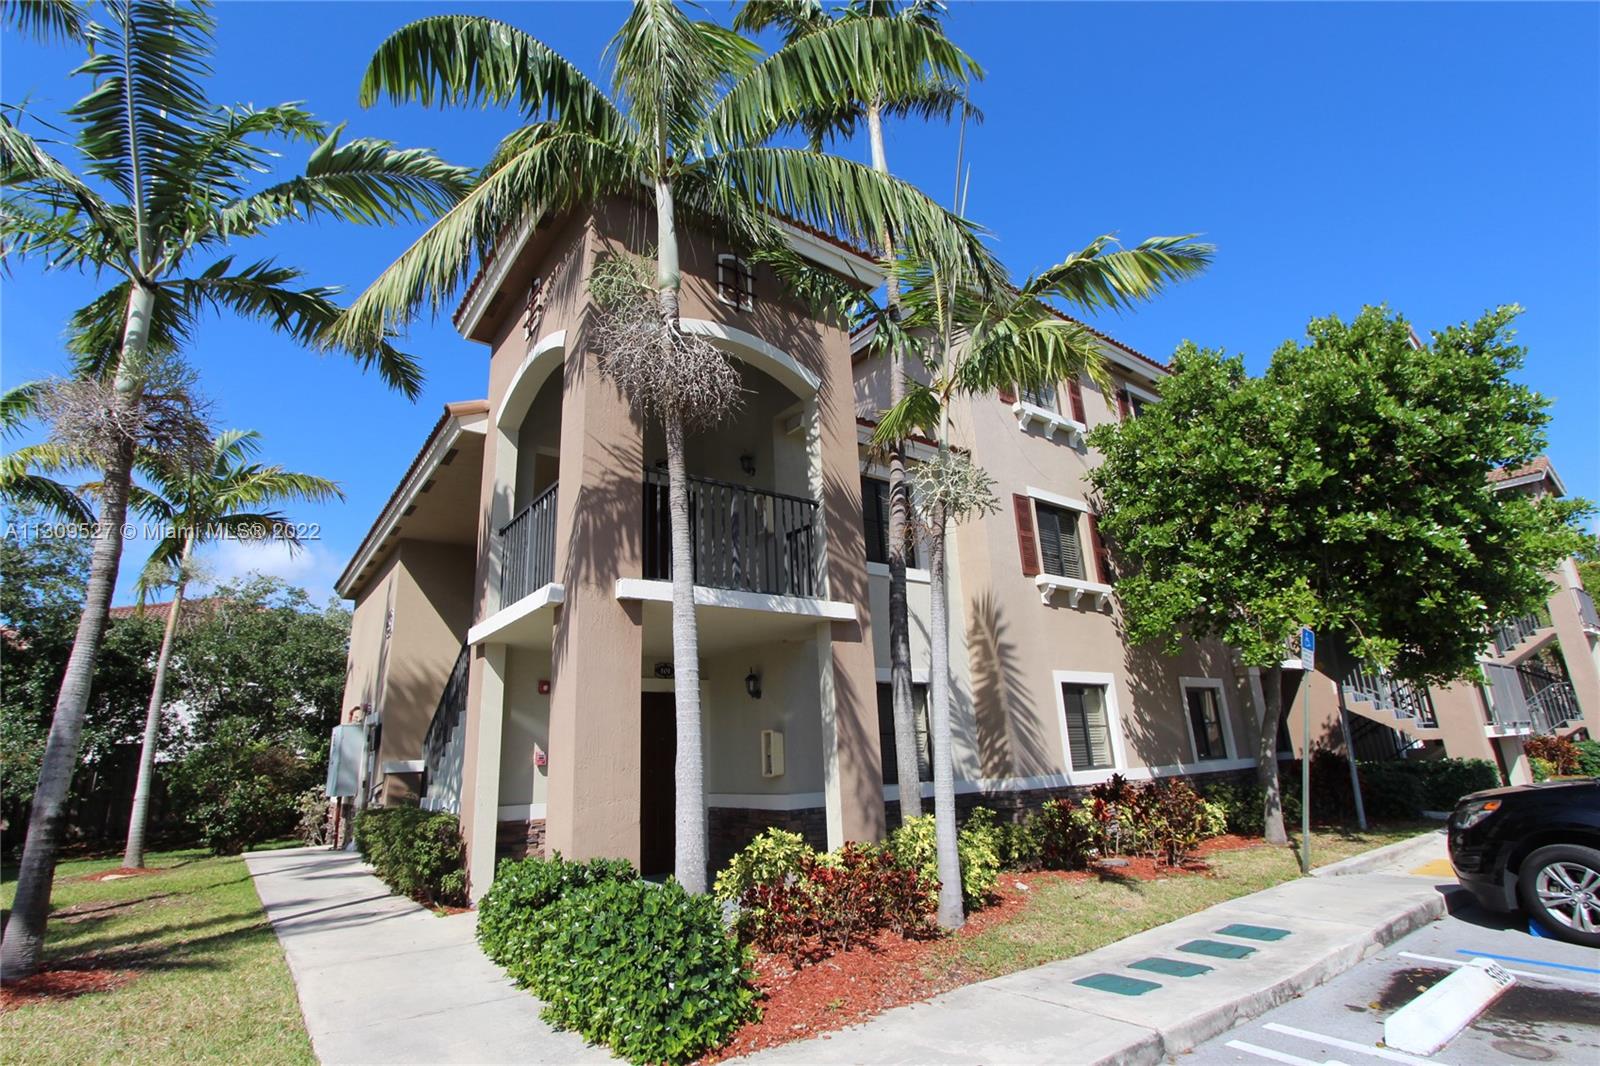 COZY UNIT LOCATE IN ISLES AT BAYSHORE. SPACIOUS AREAS, CERAMIC AND LAMINATE FLOORS, EXCELLENT CONDITION. ENJOY THE CLUBHOUSE, POOL, GYM AND THE BEAUTIFUL LAKES AND LANDSCAPING AROUND THE COMMUNITY. TENANT PAYS THE WATER.